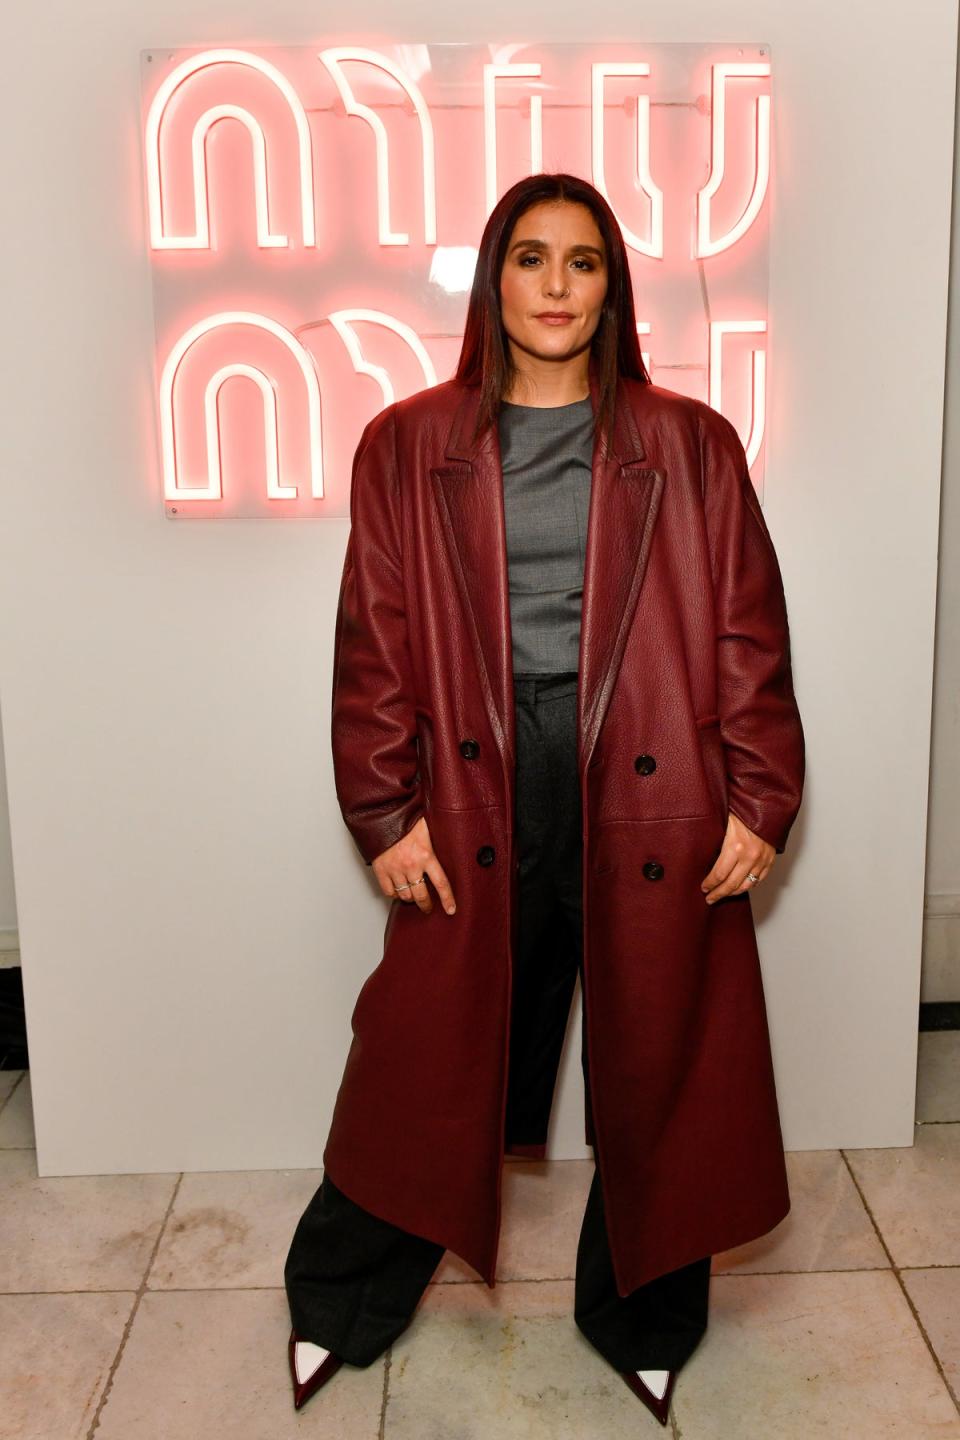 Jessie Ware attends the Miu Miu Holiday party at Quo Vadi (Dave Benett)